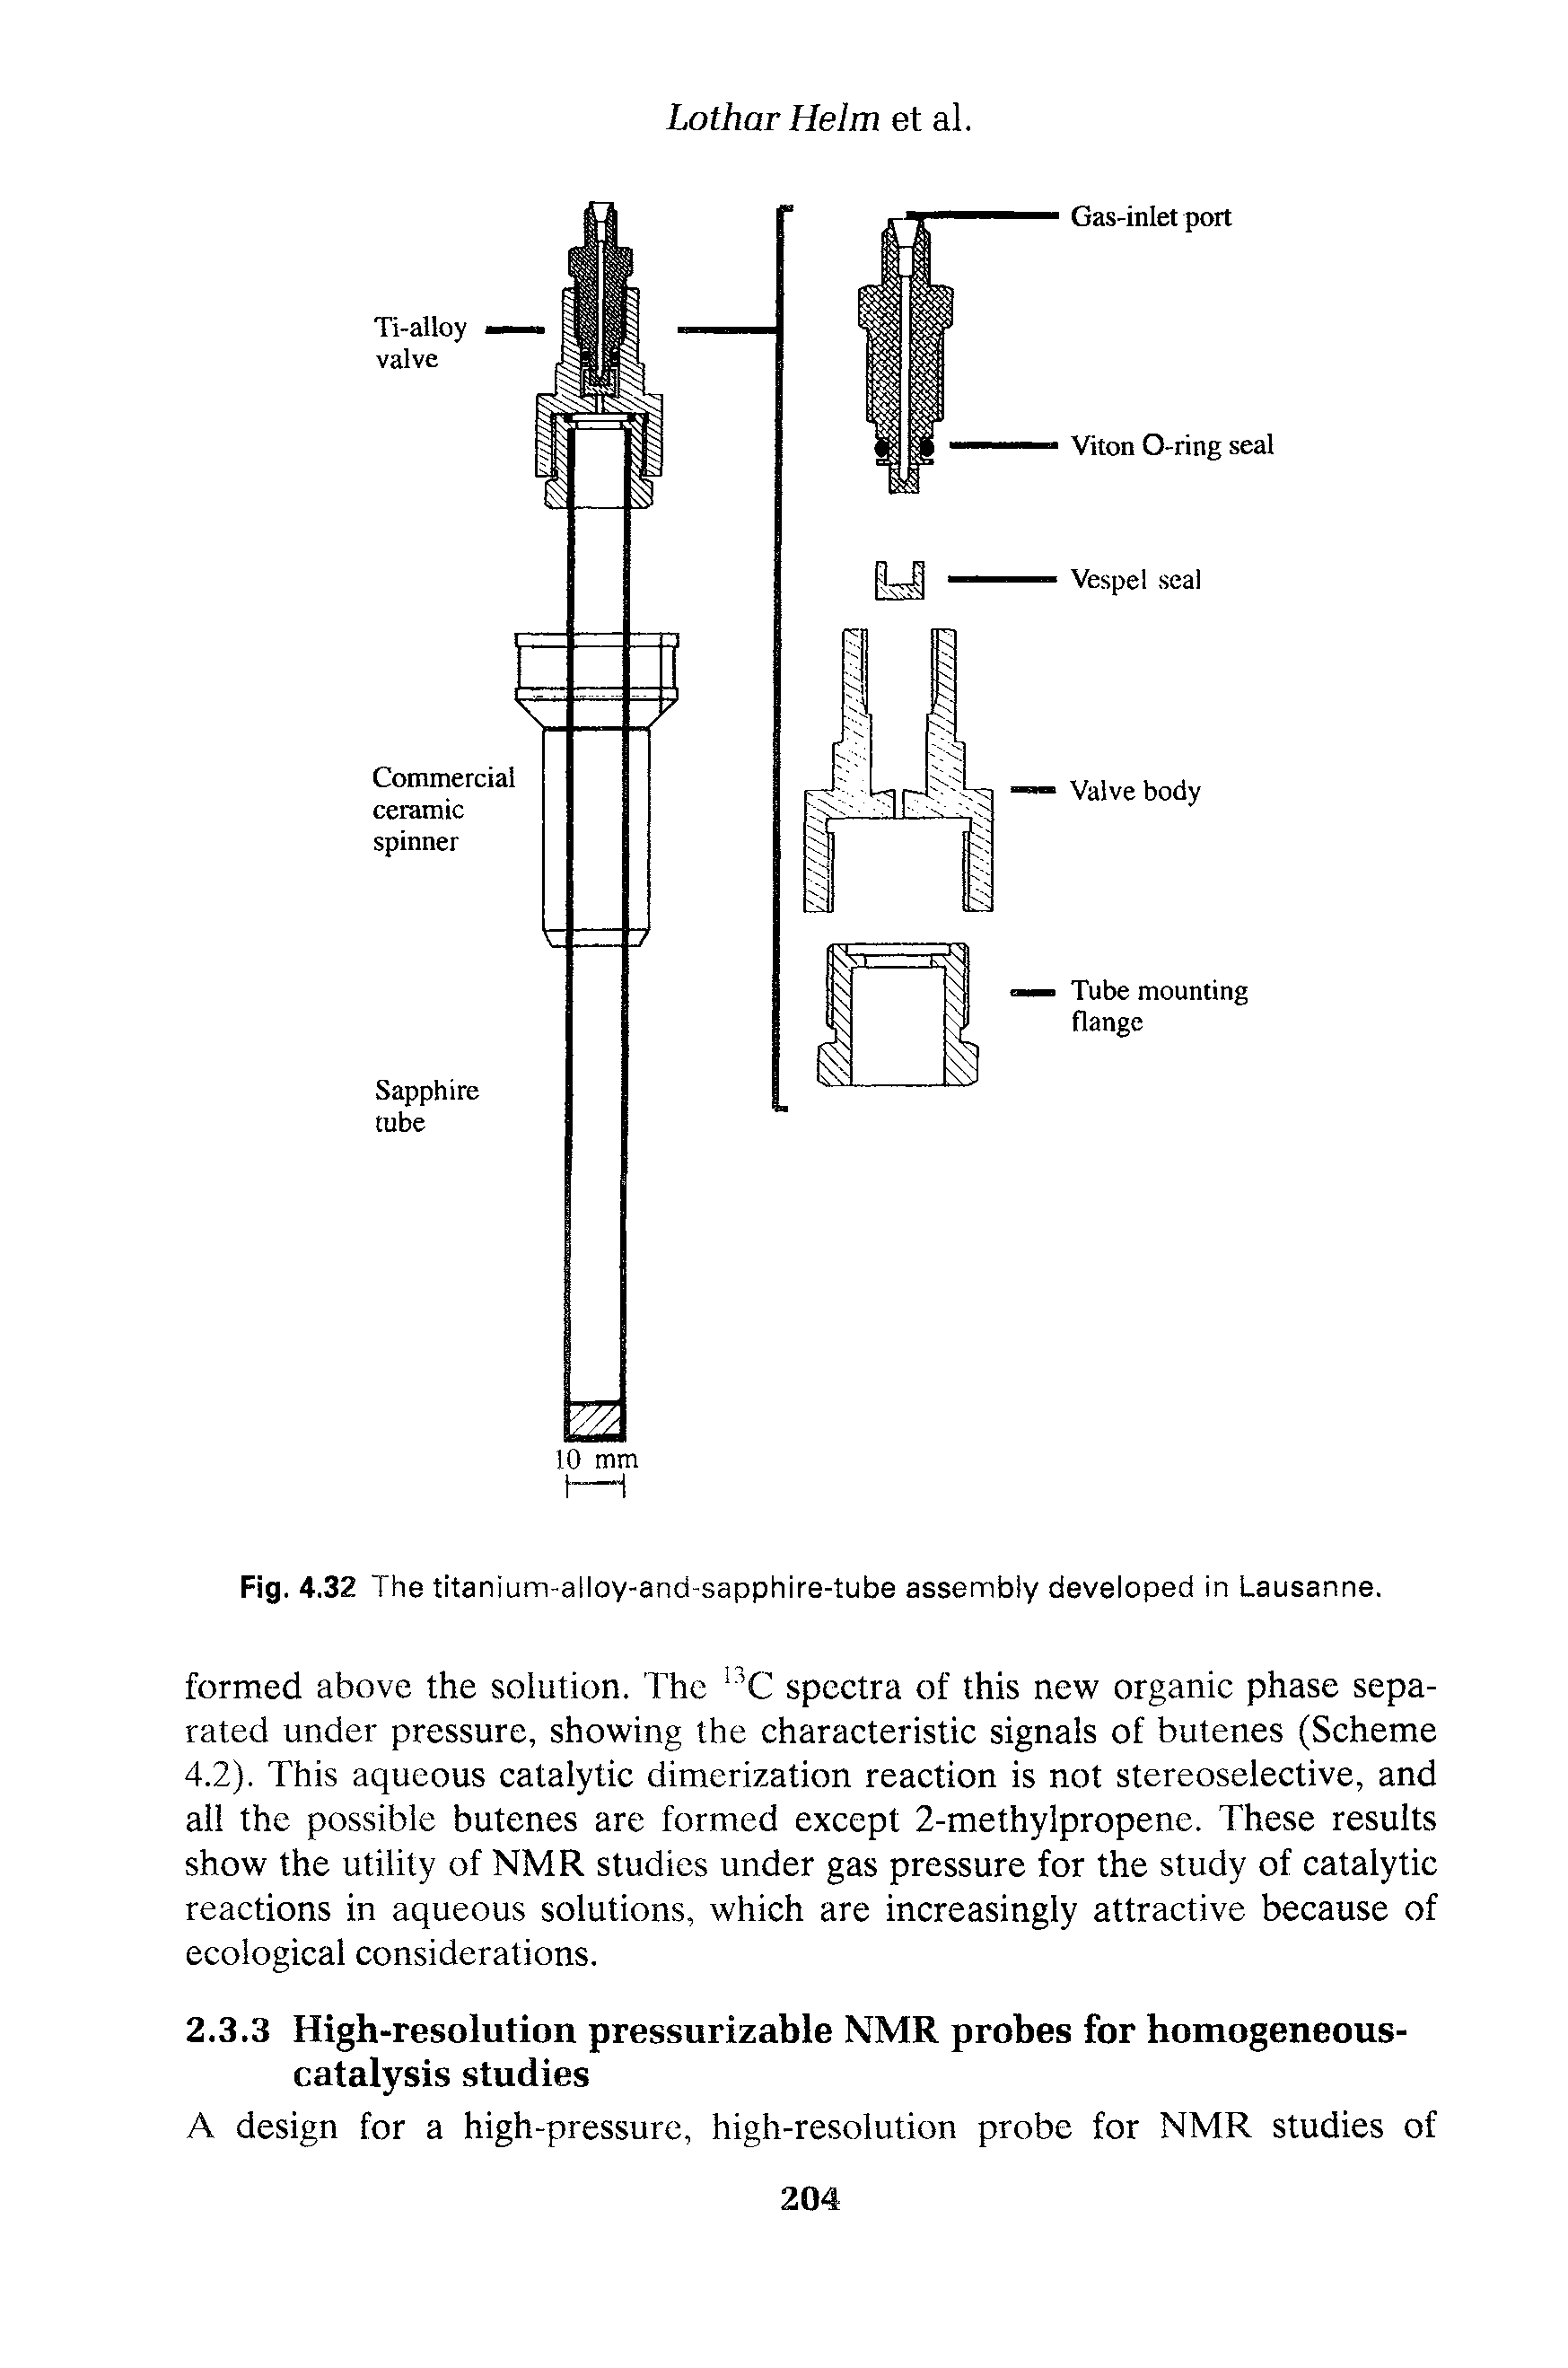 Fig. 4.32 The titanium-alloy-and-sapphire-tube assembly developed in Lausanne.